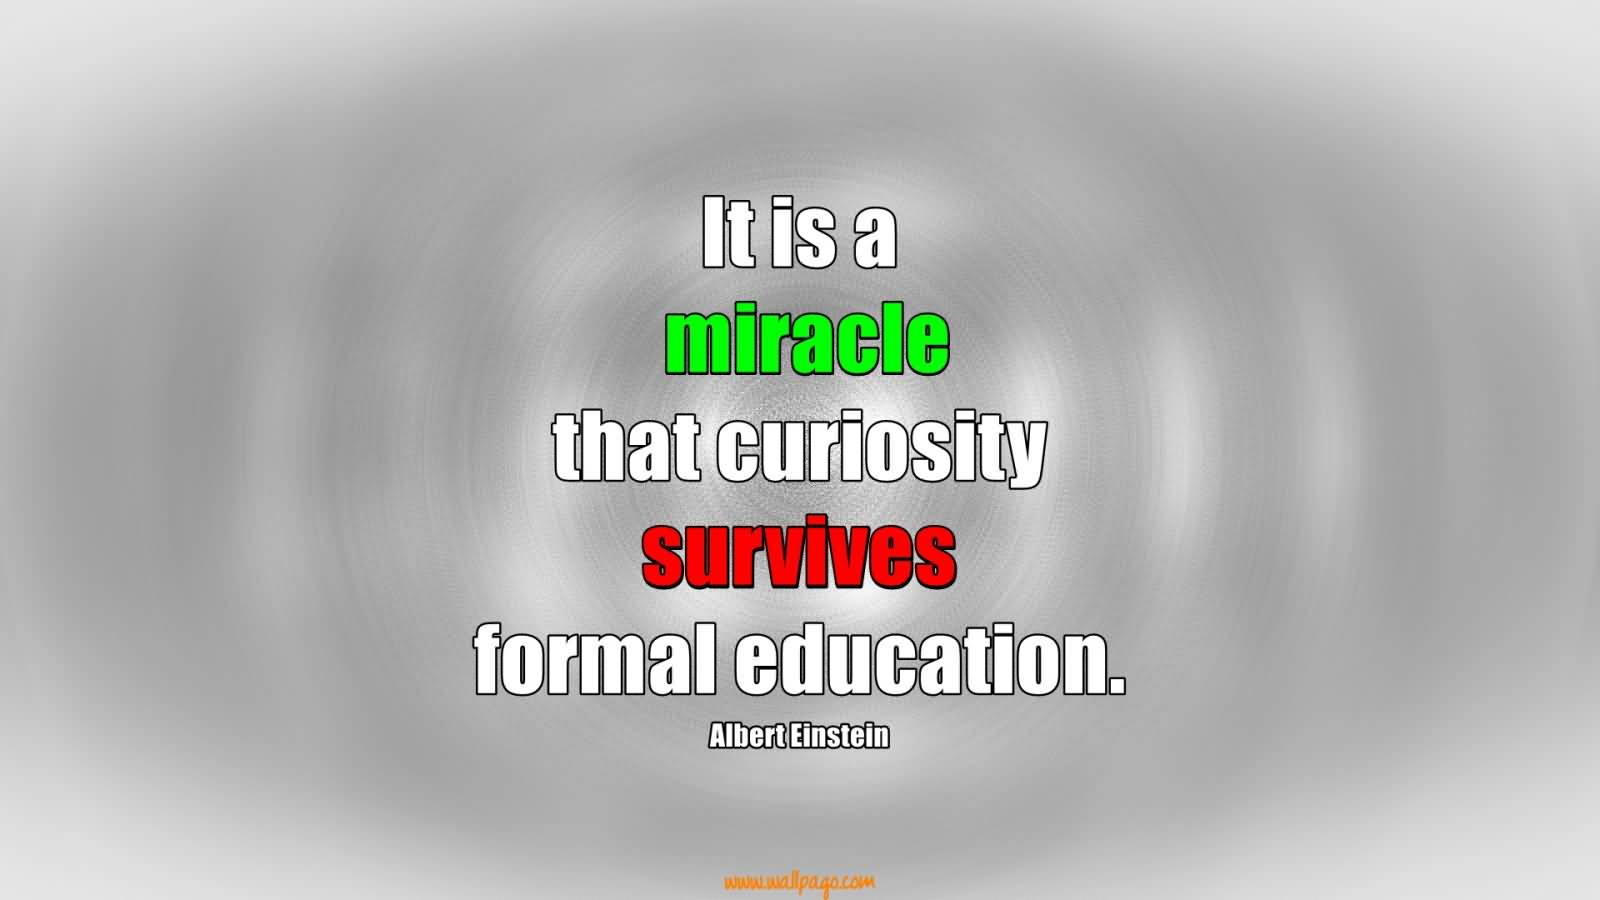 It is a miracle that curiosity survives formal education.